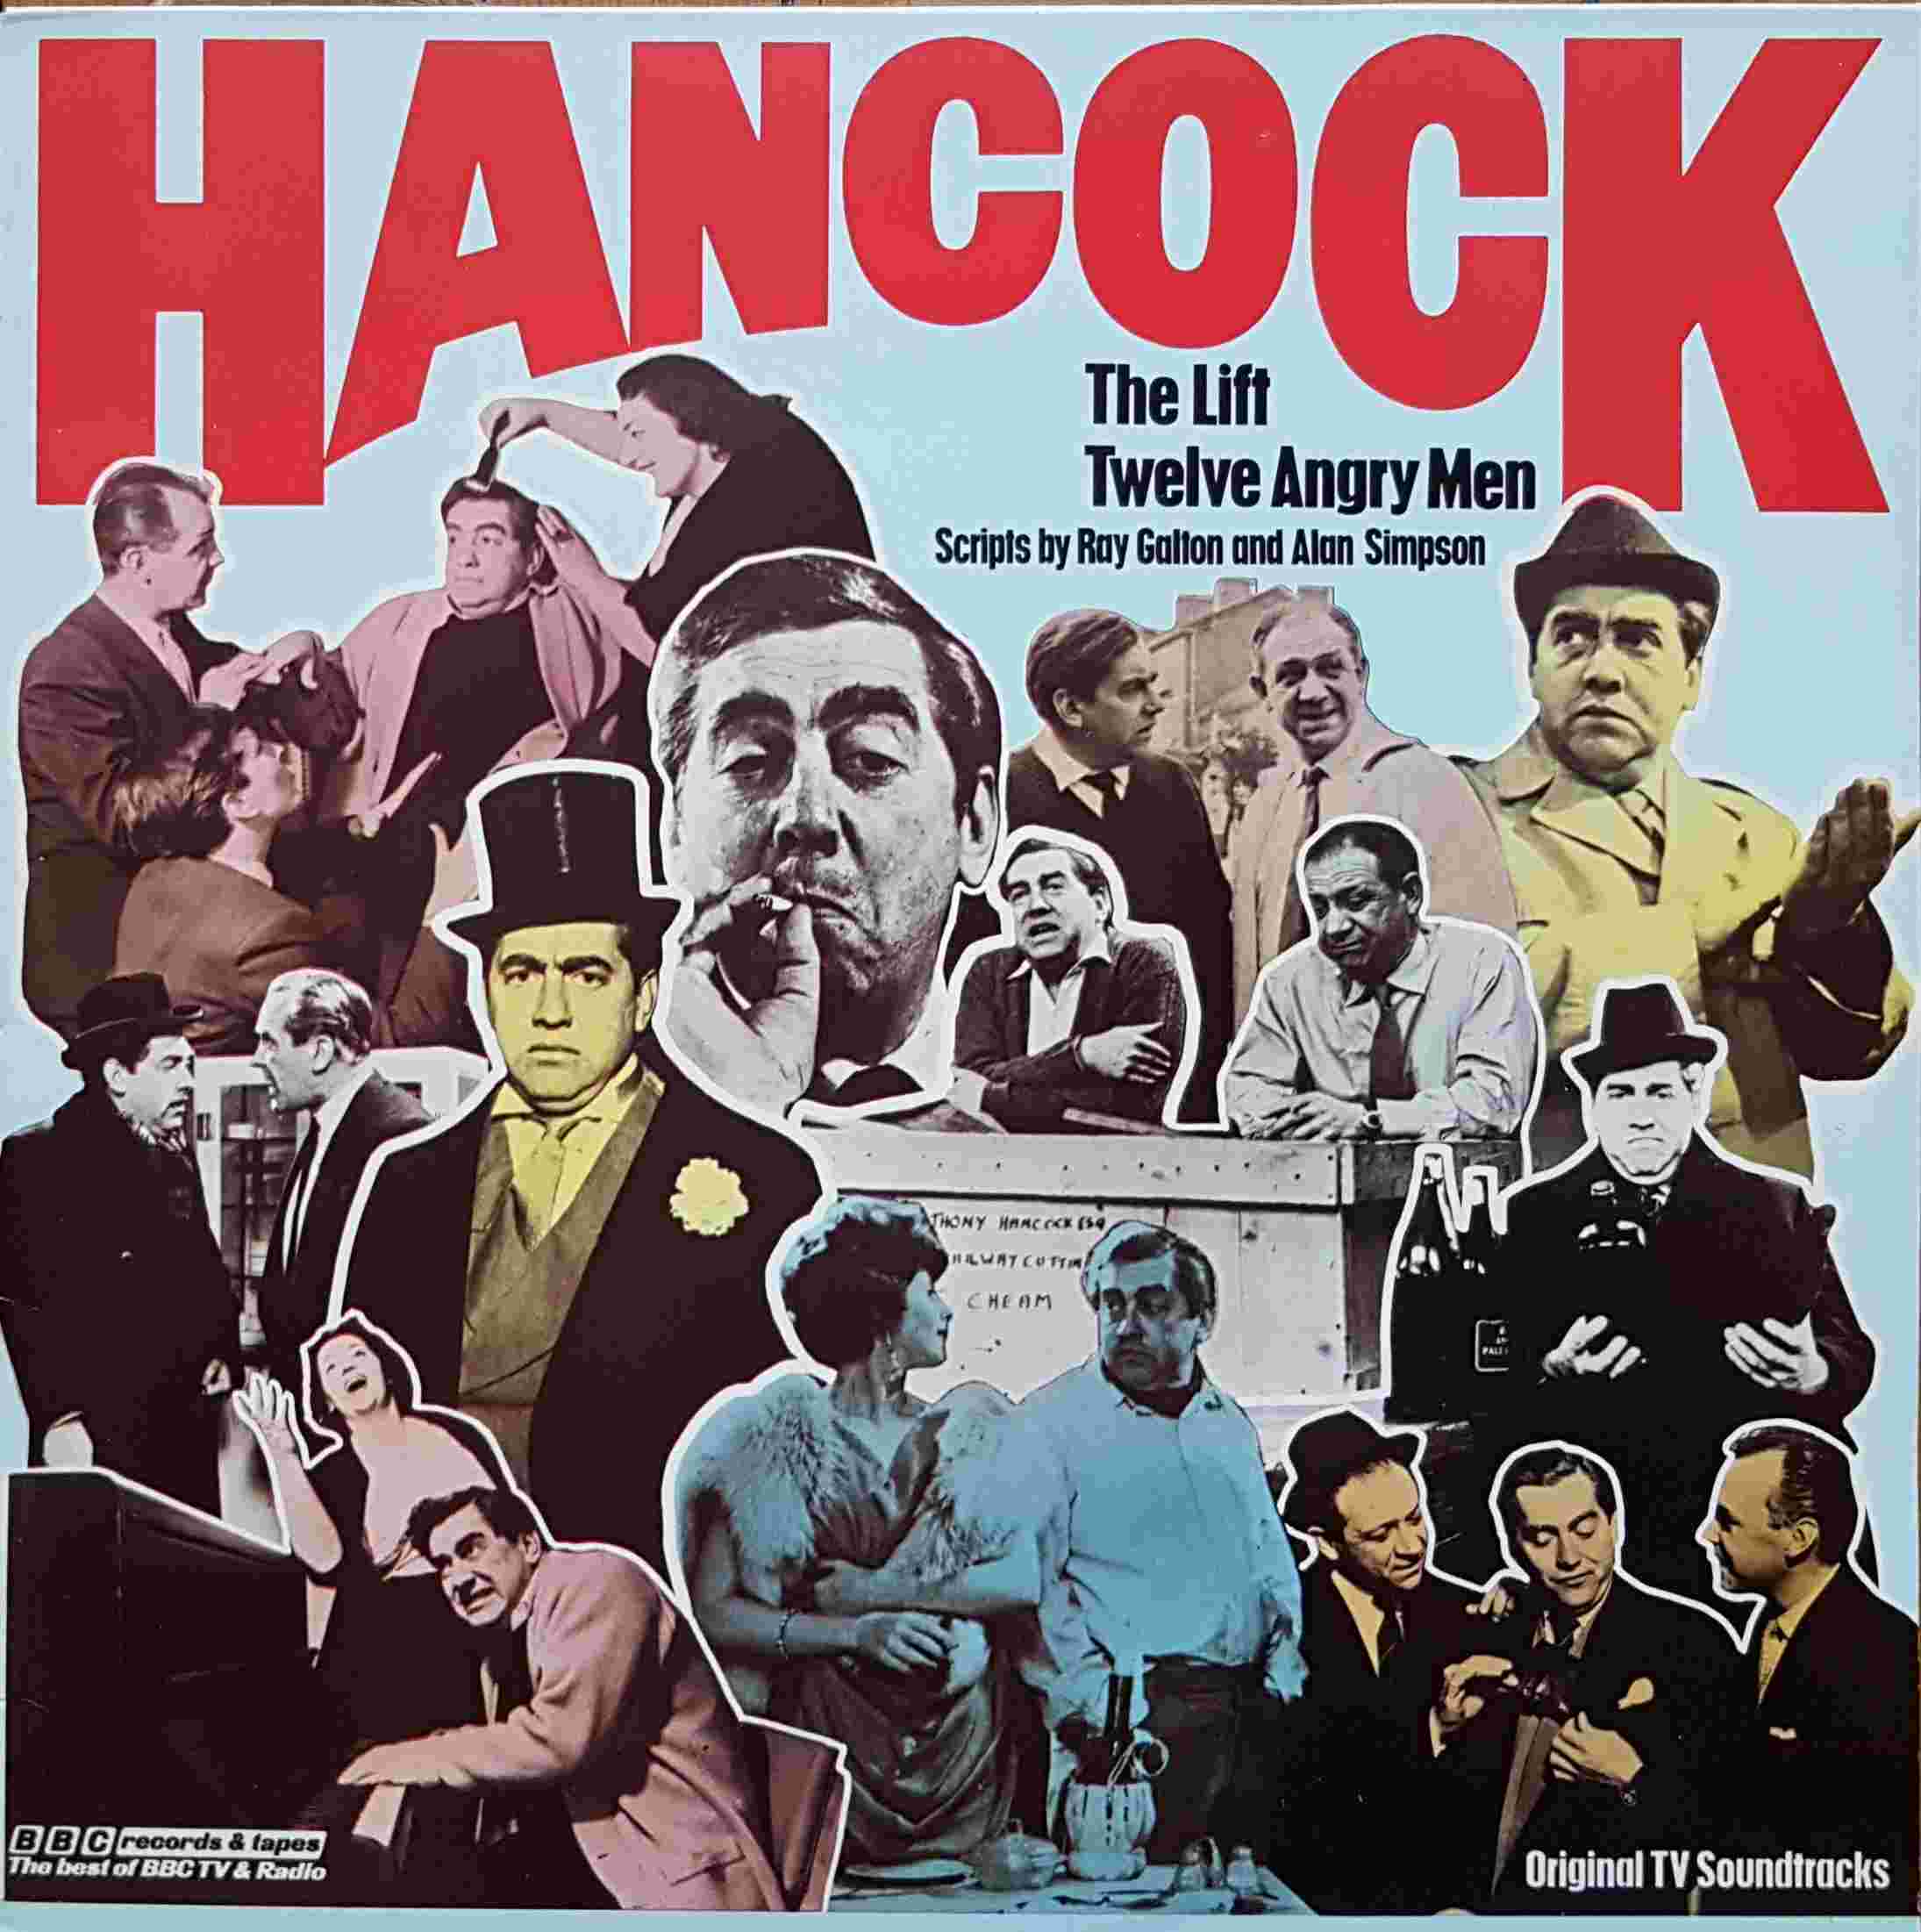 Picture of REB 260 Hancock by artist Tony Hancock from the BBC albums - Records and Tapes library